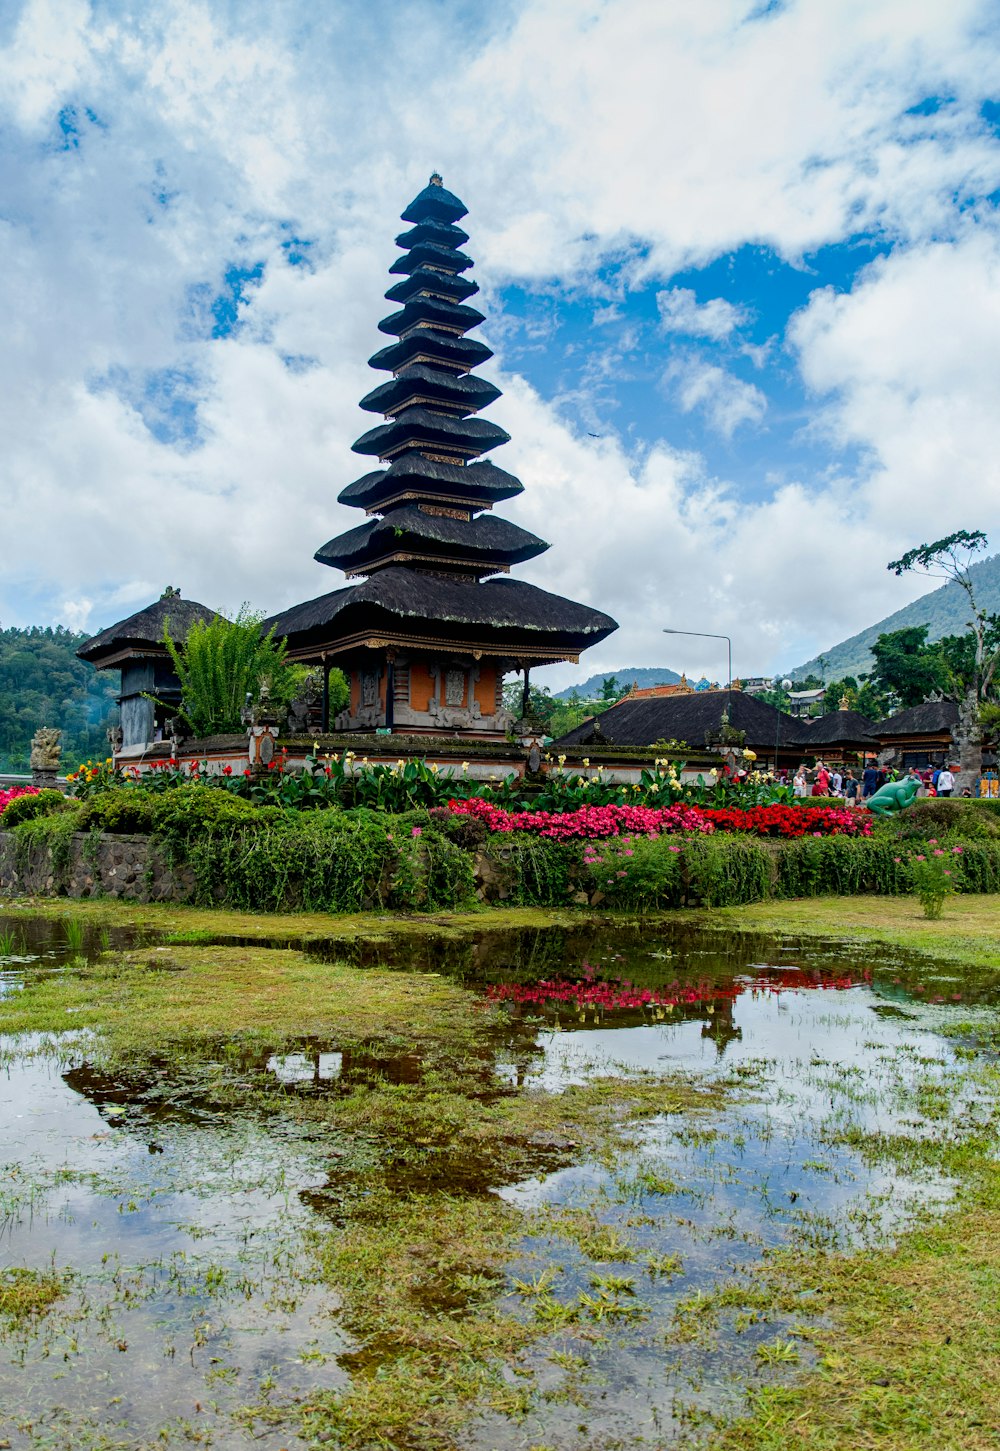 black and white pagoda temple near green grass field under blue and white cloudy sky during